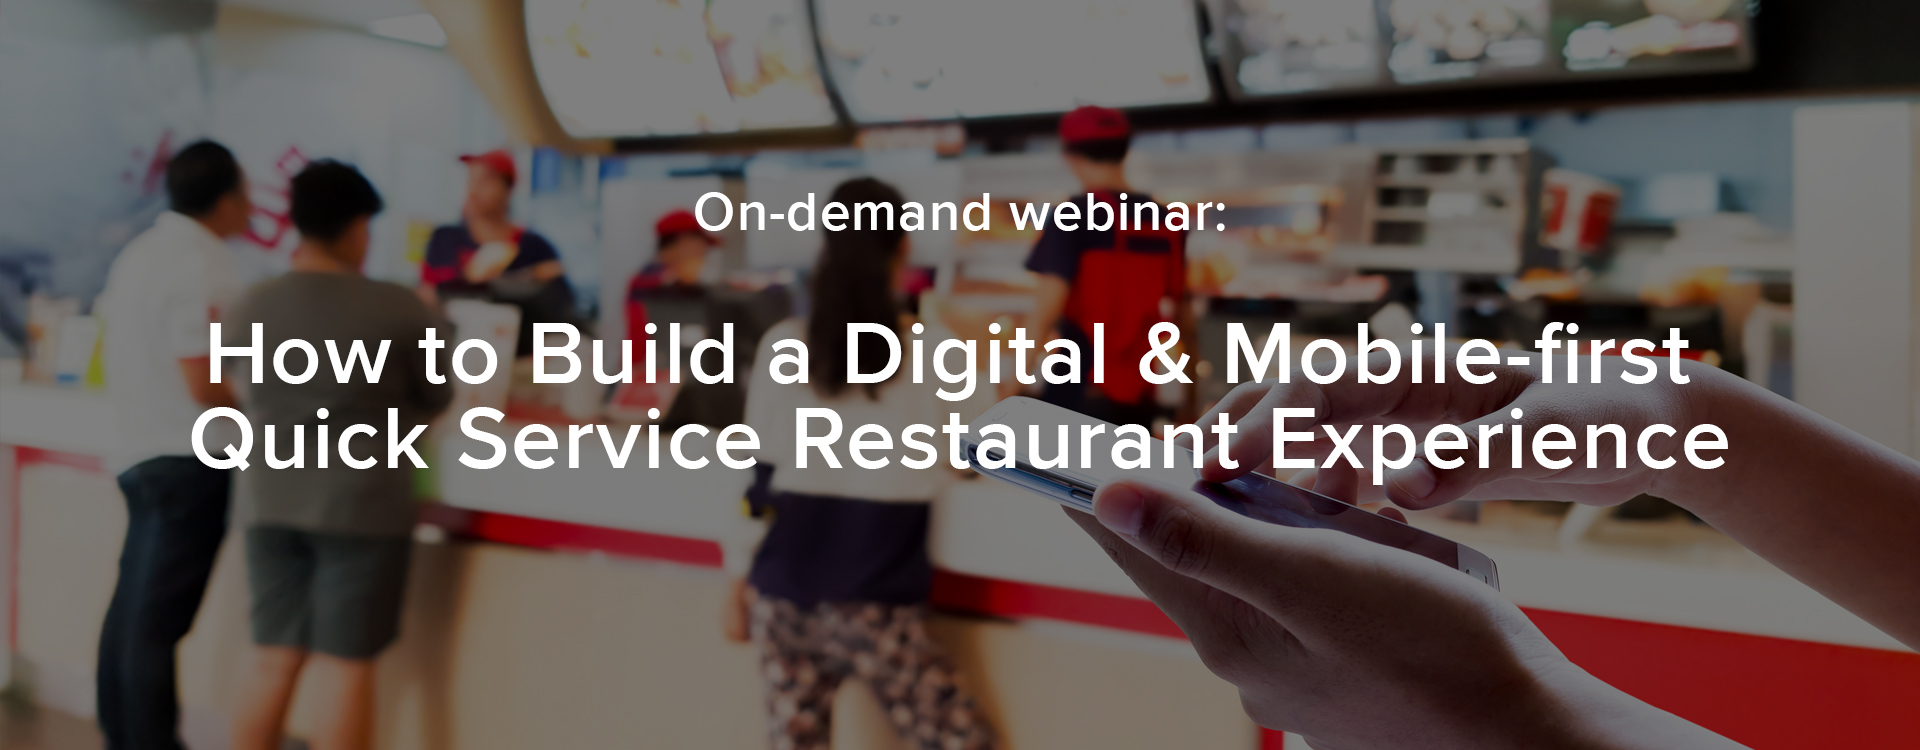 how to build a digital & mobile-first quick service restaurant experience